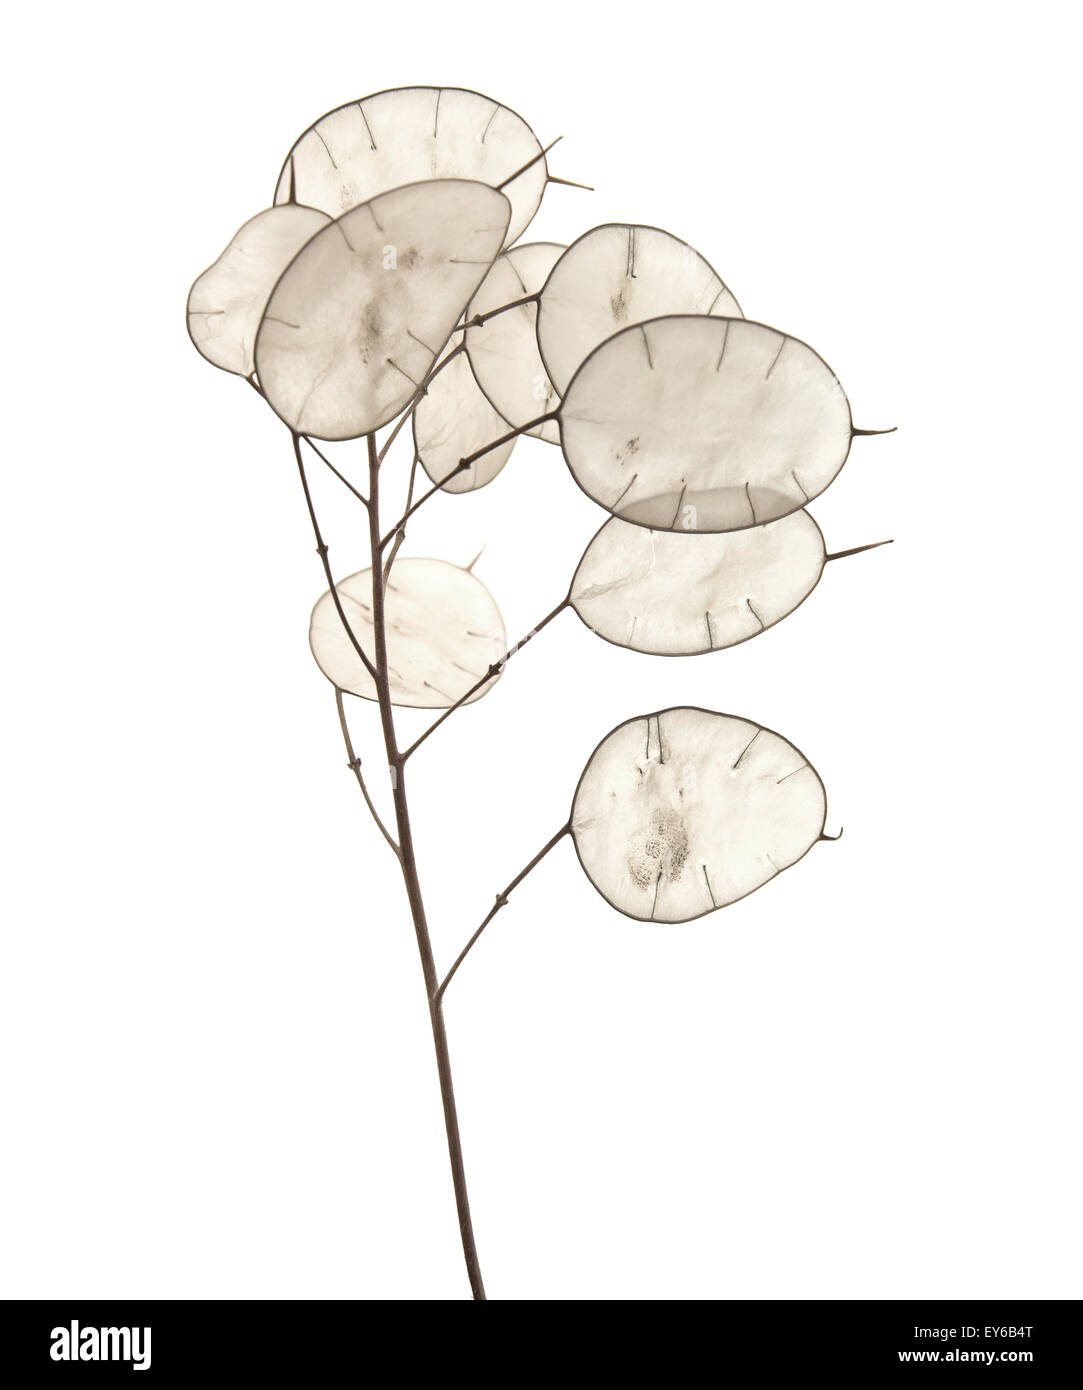 Lunaria annua, silver dollar plant isolated on white background Stock Photo